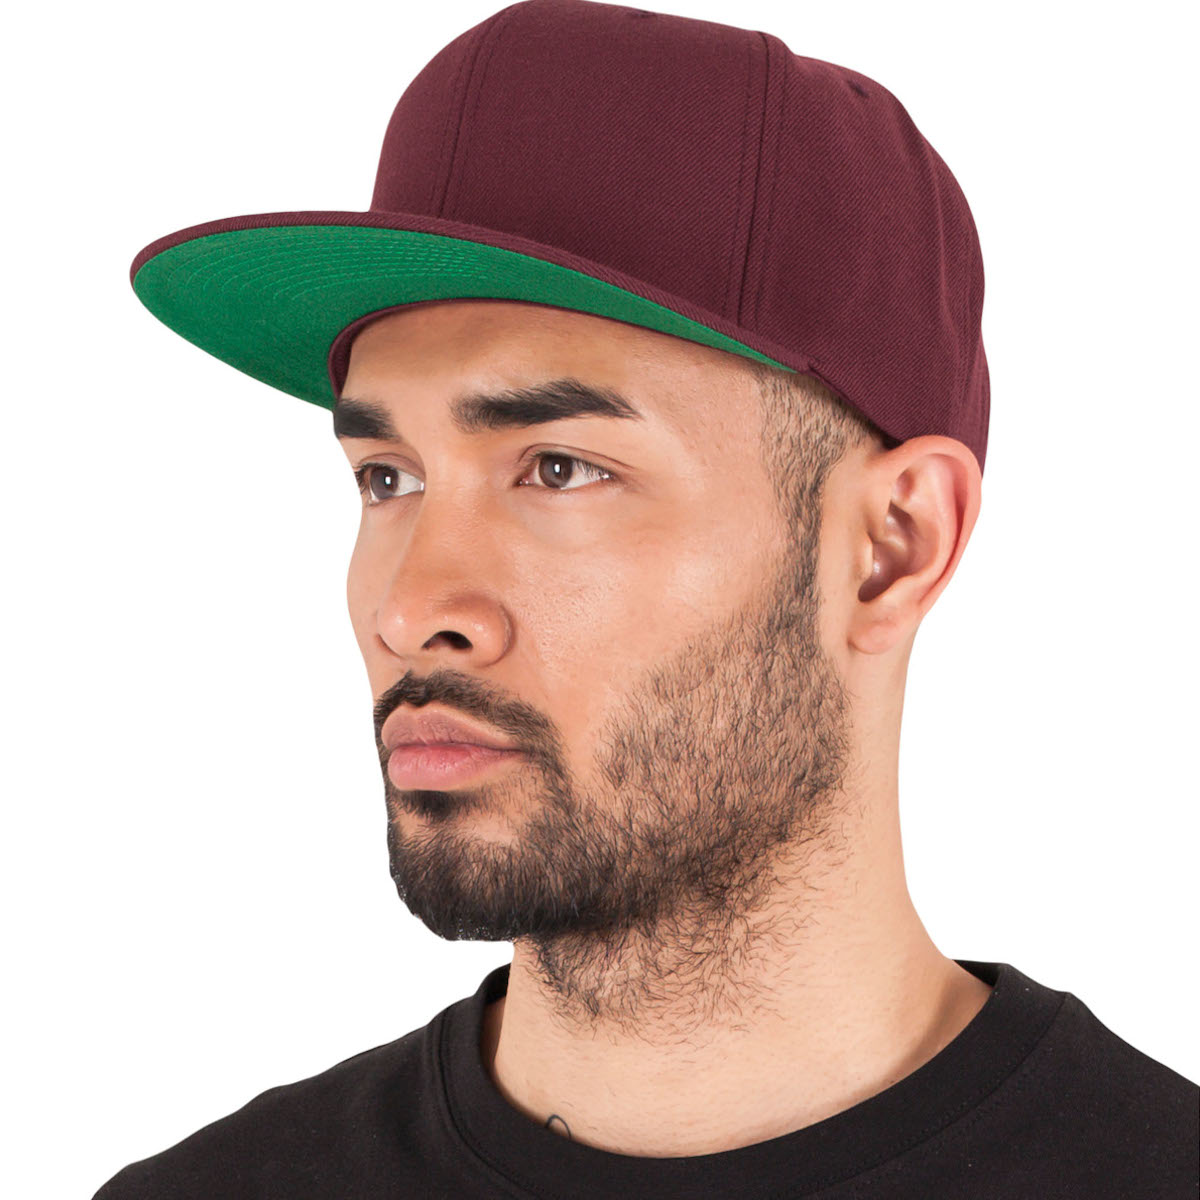 The Flexfit Yupoong Snapback by Classic